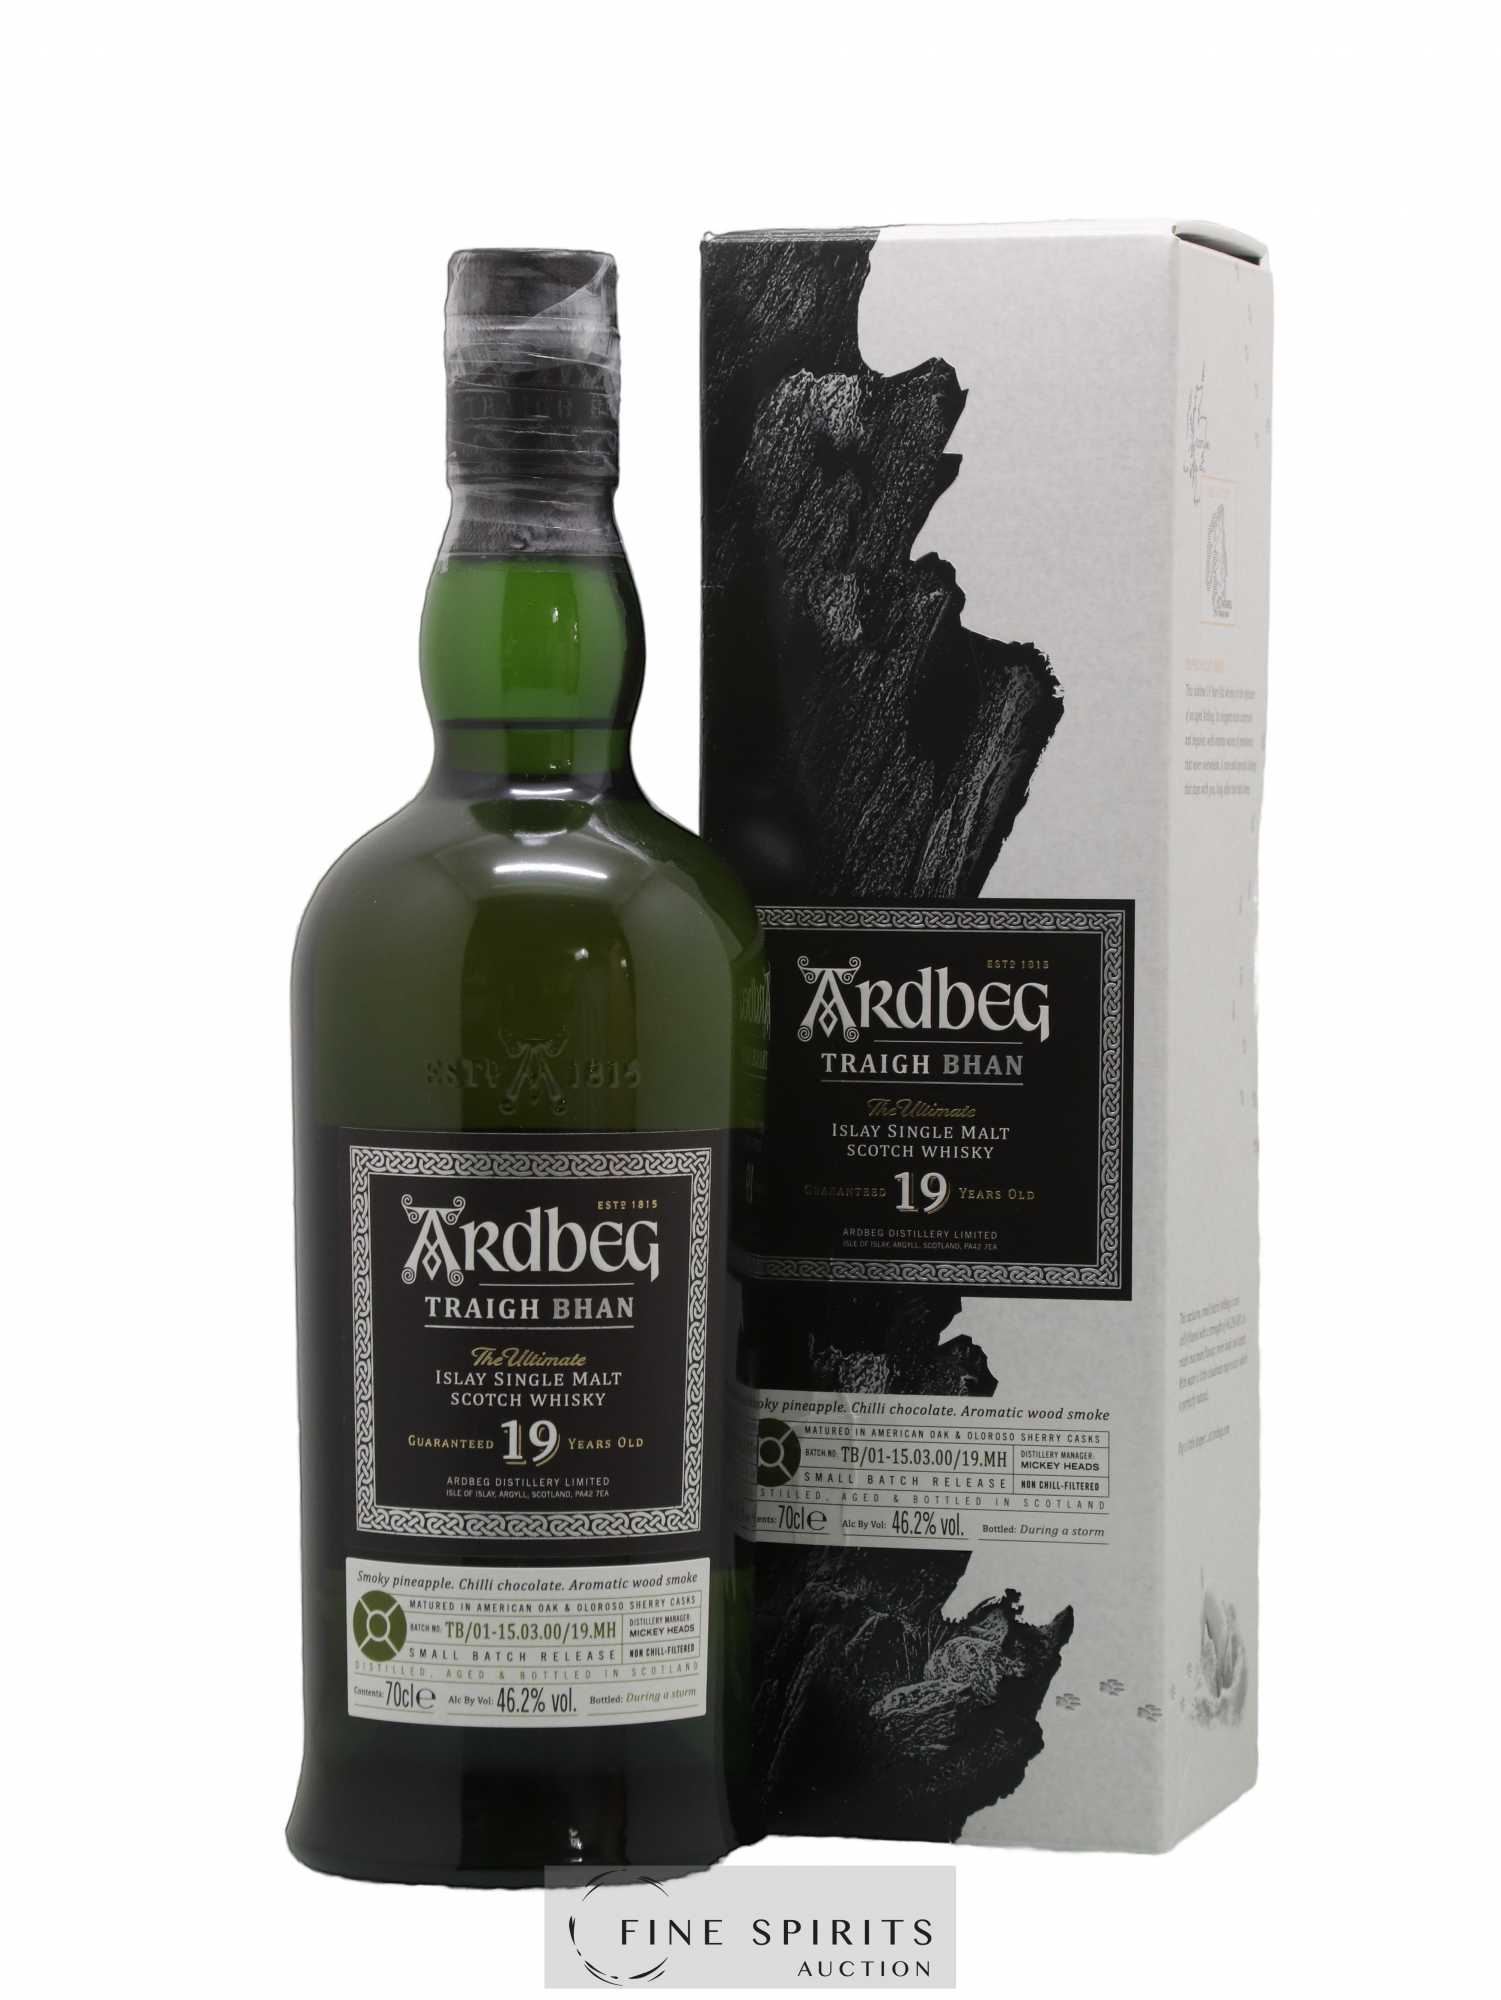 Ardbeg 19 years Of. Traigh Bhan TB-01-15.03.00-19.MH The Ultimate 